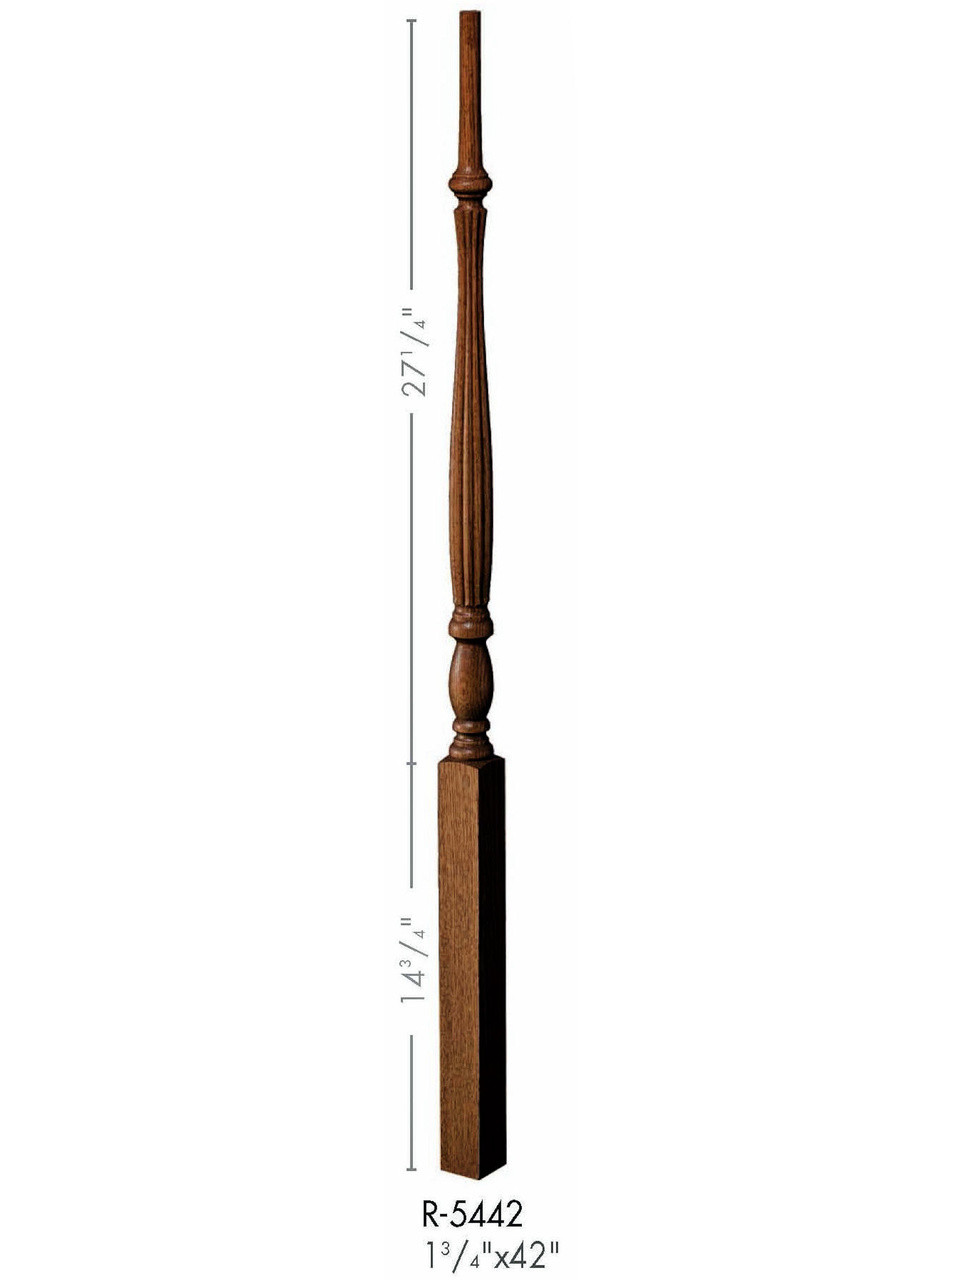 R-5442 42-inch Reeded Country Classic Baluster